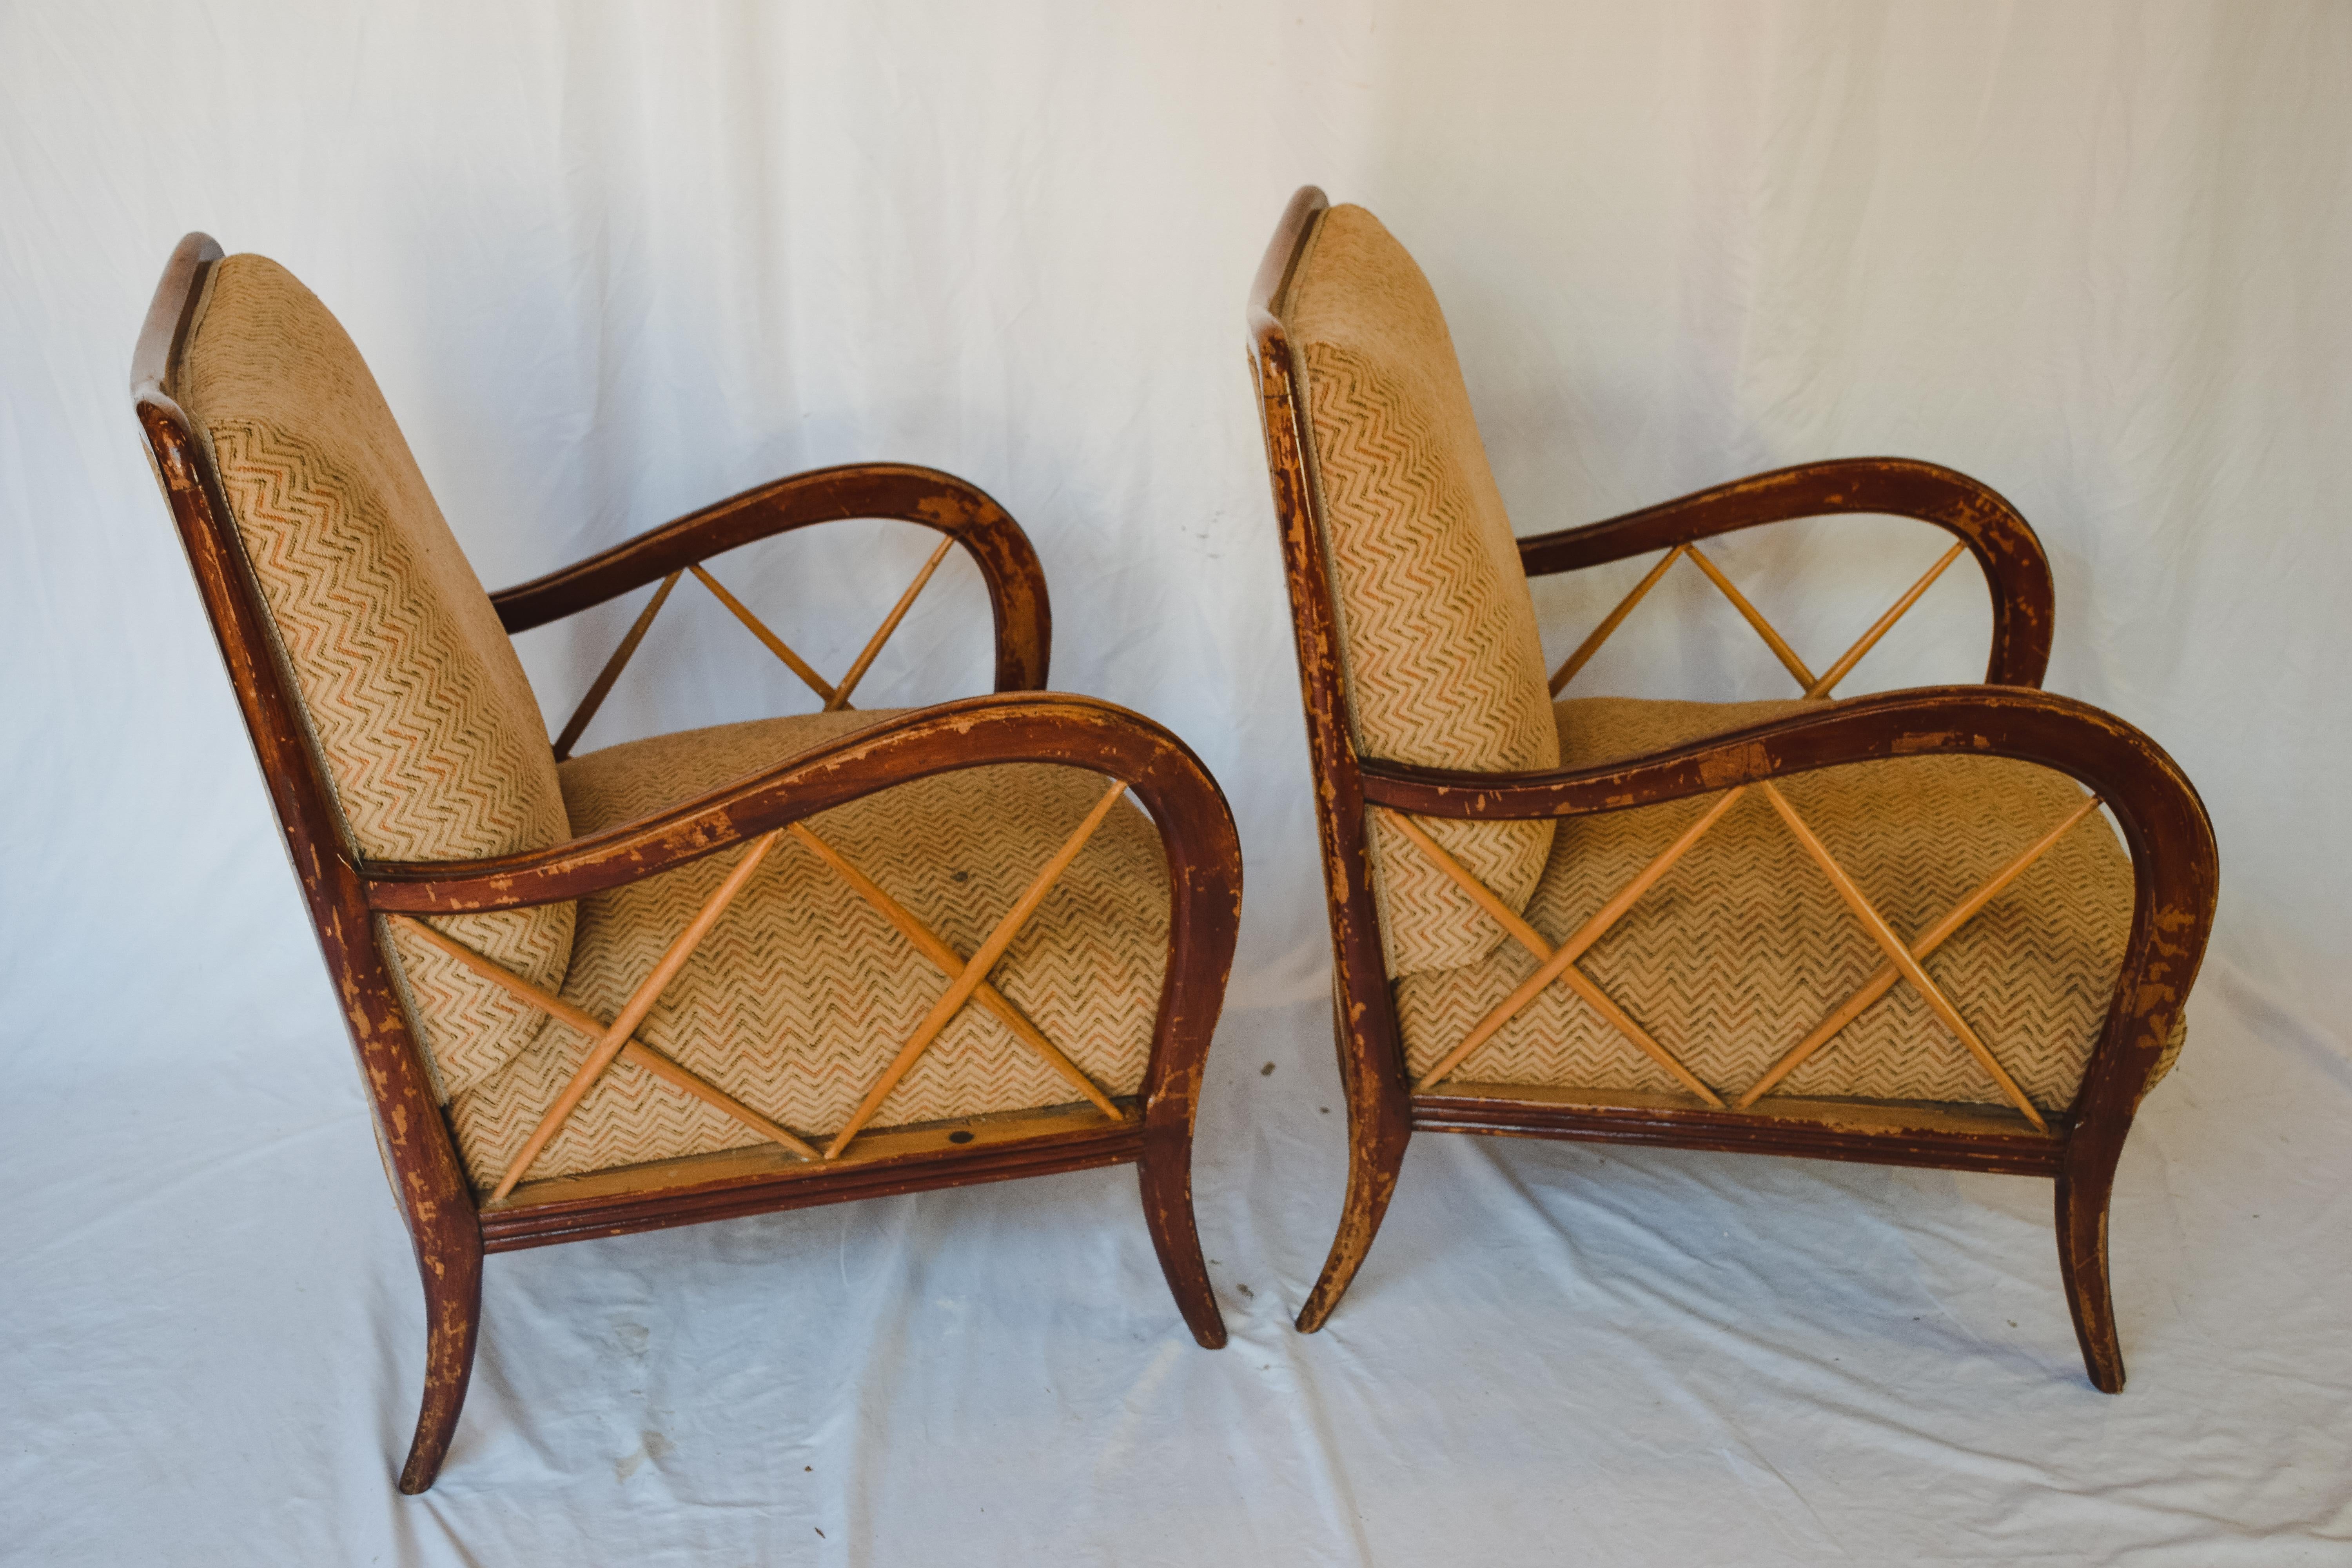 An unusually beautiful pair of vintage lounge chairs from Italy. Made of solid wood with an upholstered seat and back. A beautiful worn patina with a nod to a bamboo style detail on the sides of the arms. The current fabric does not appear to be